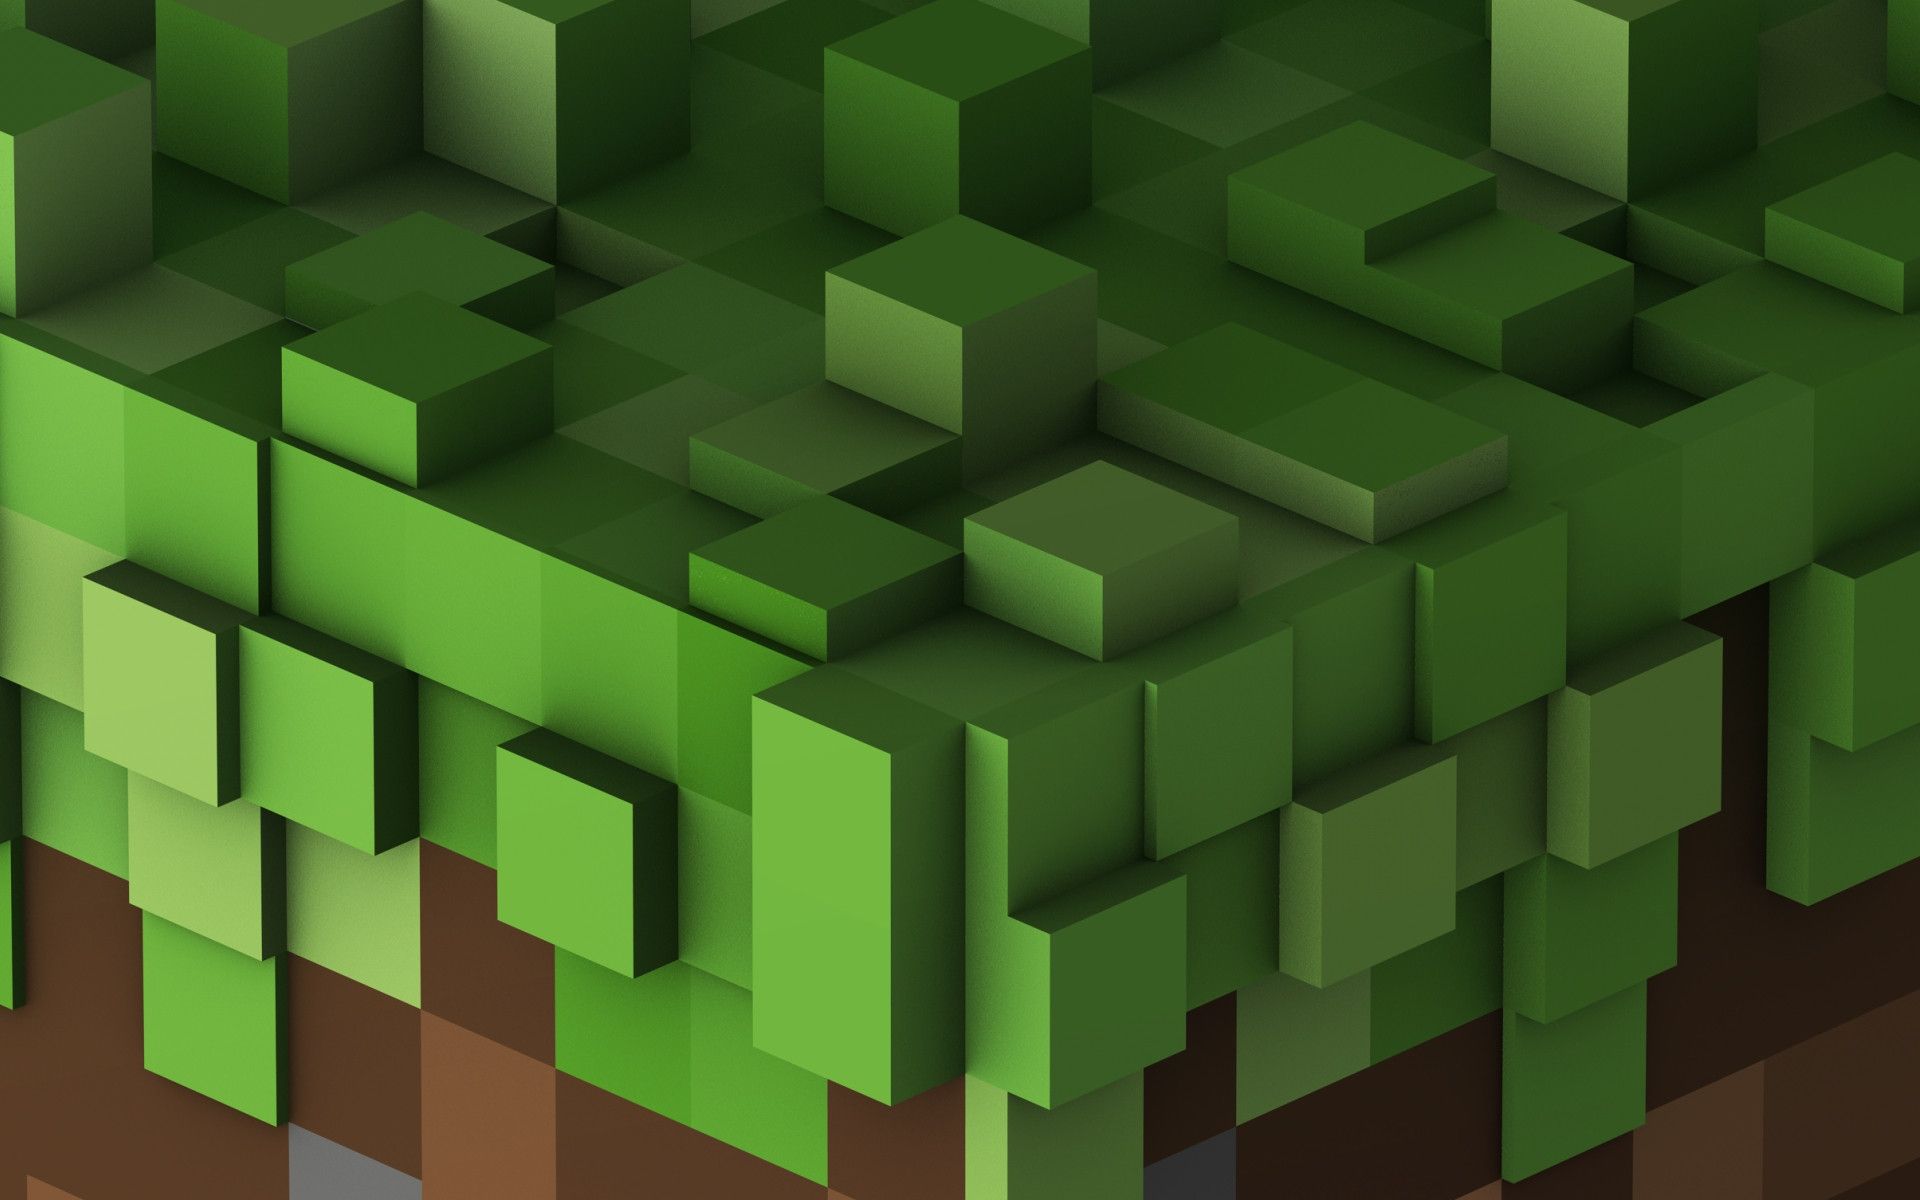 225 minecraft wallpapers minecraft backgrounds-1 | HD Wallpapers Range